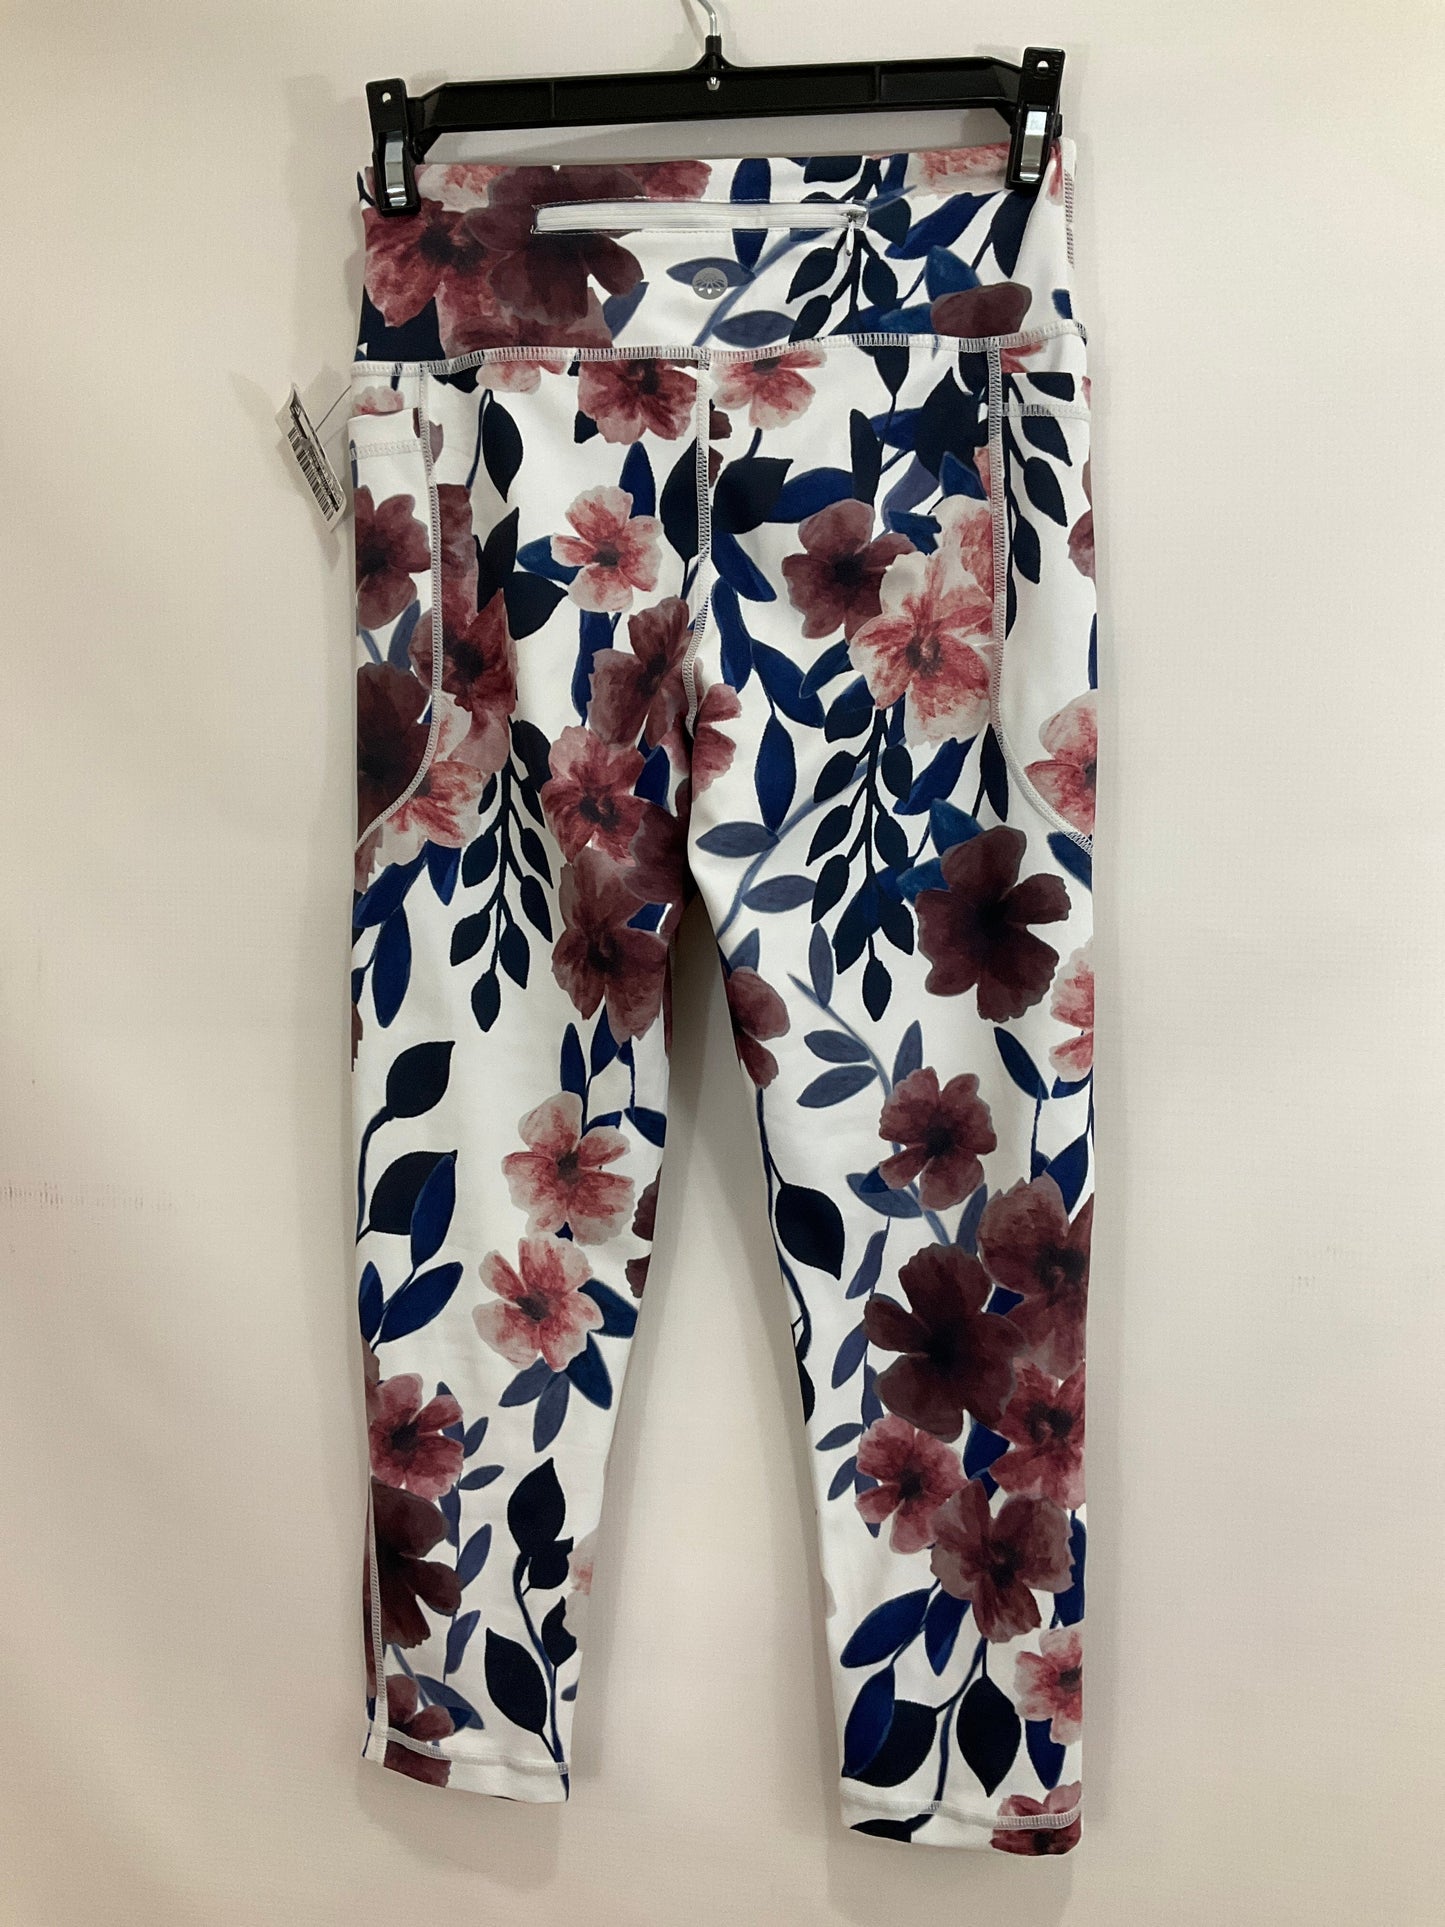 Floral Print Athletic Leggings Clothes Mentor, Size Xs